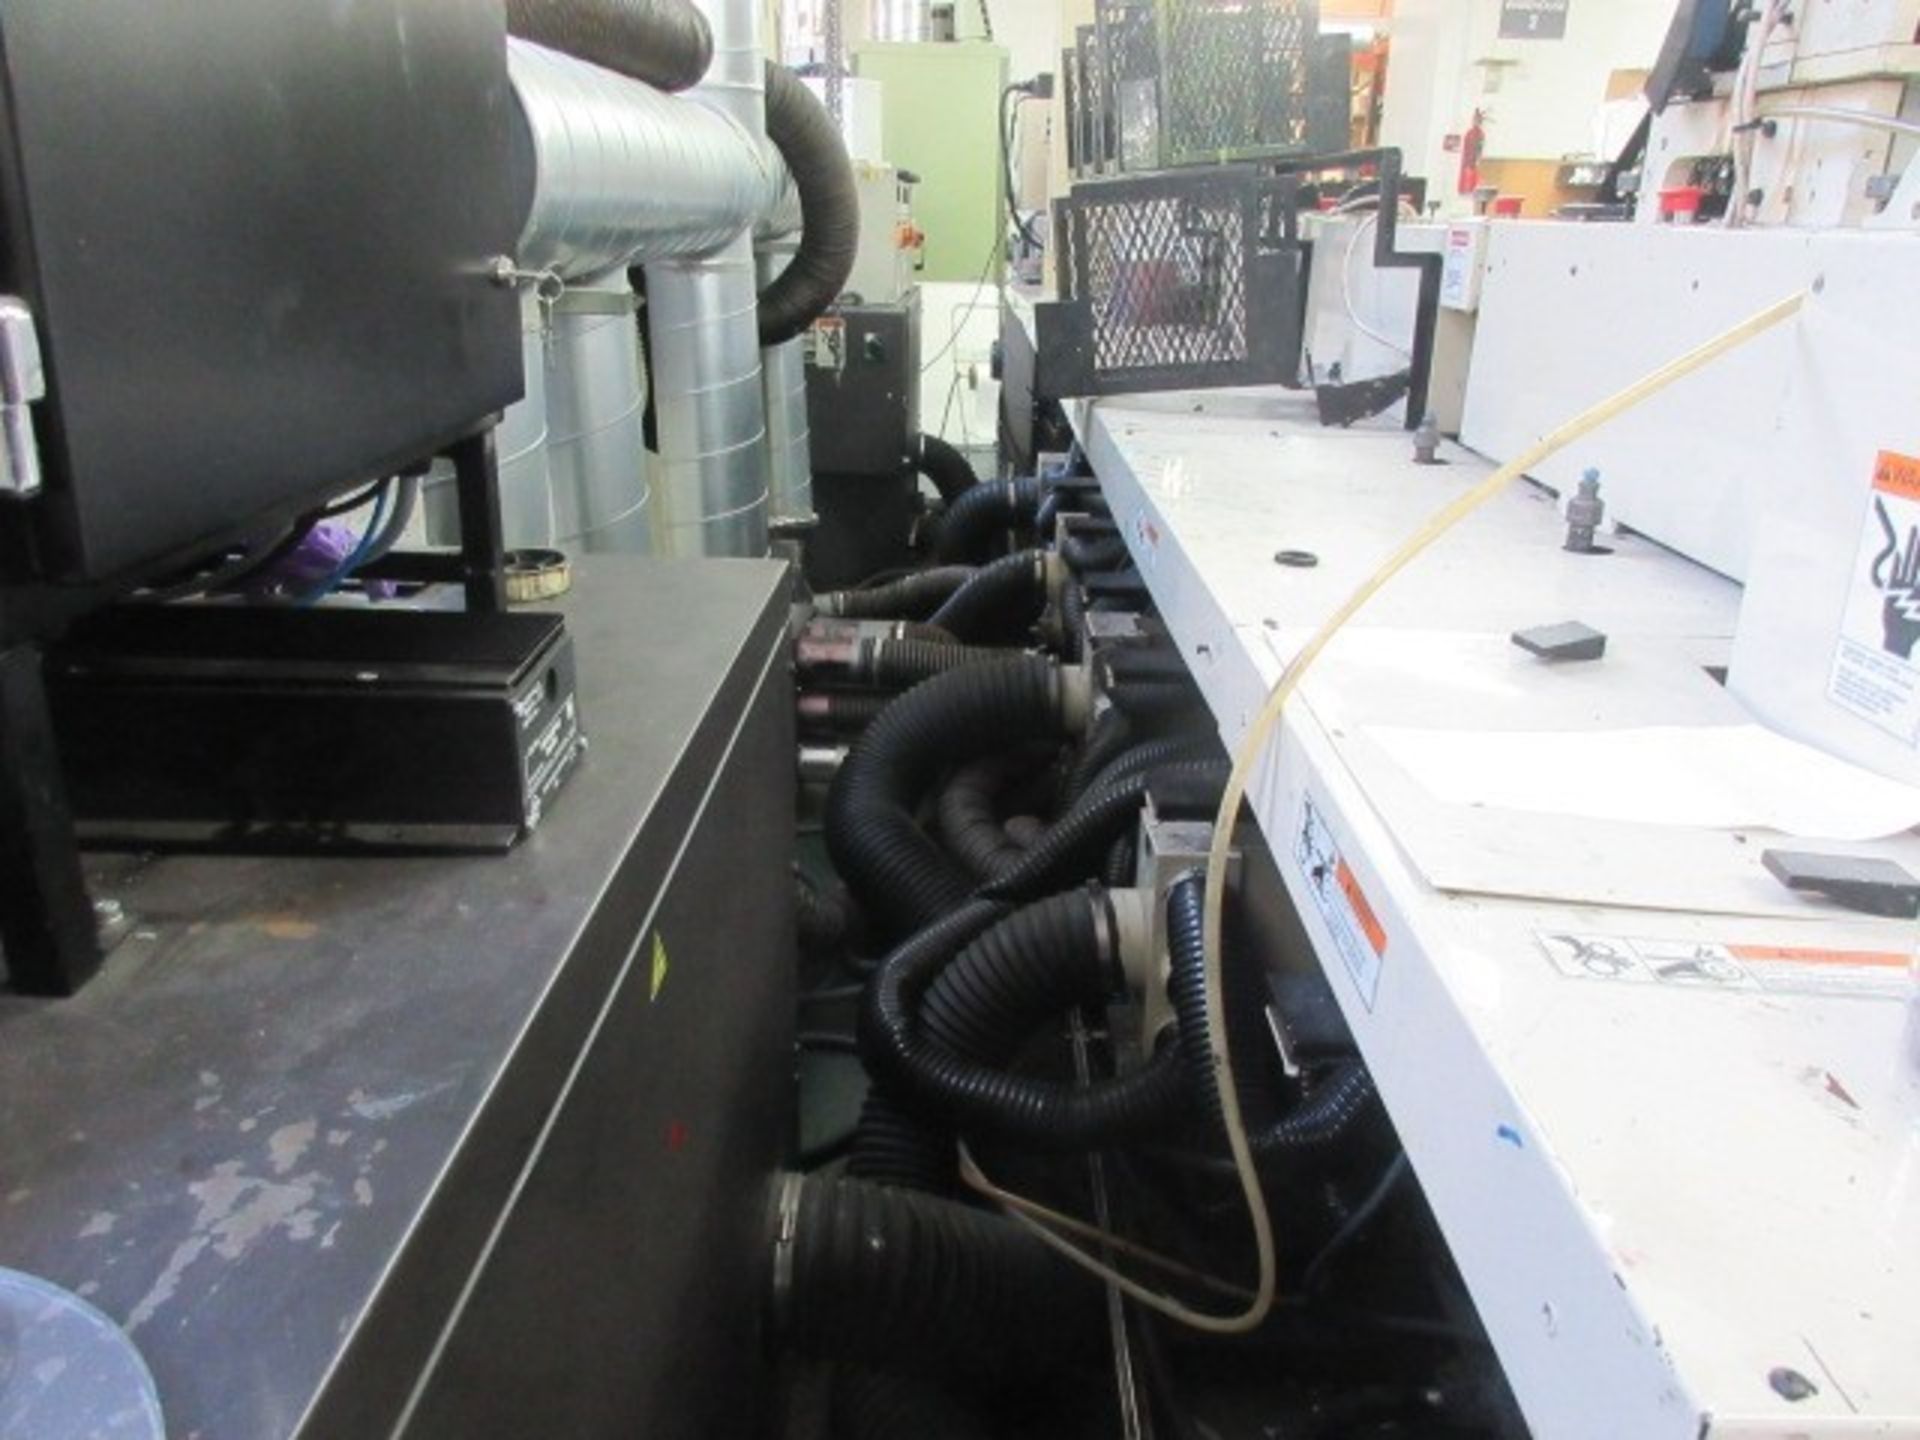 Mark Andy 2200-10F 10” 8 colour flexographic label printing press. Serial no: 1260086 (2002) - Image 328 of 383